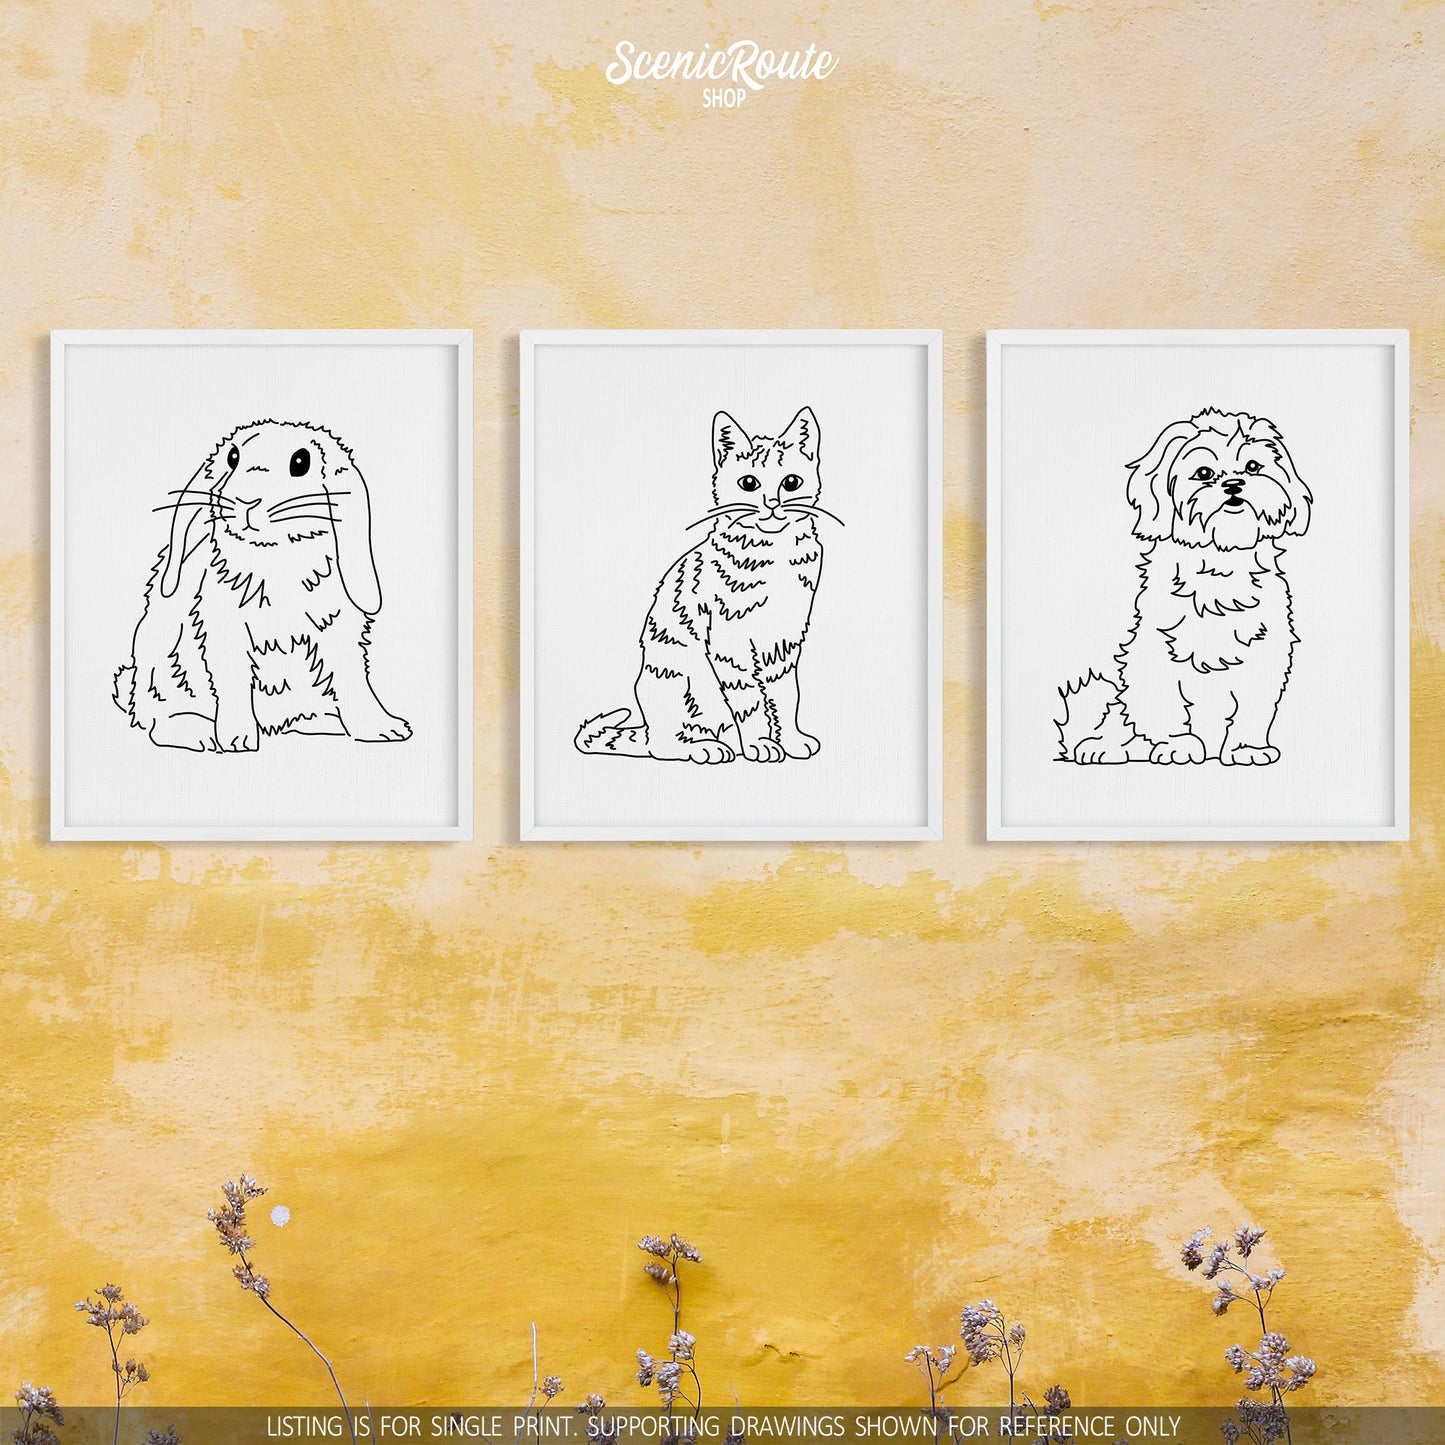 A group of three framed drawings on a yellow wall. The line art drawings include a Mini Lop Rabbit, a Tabby Cat, and a Shih Tzu dog